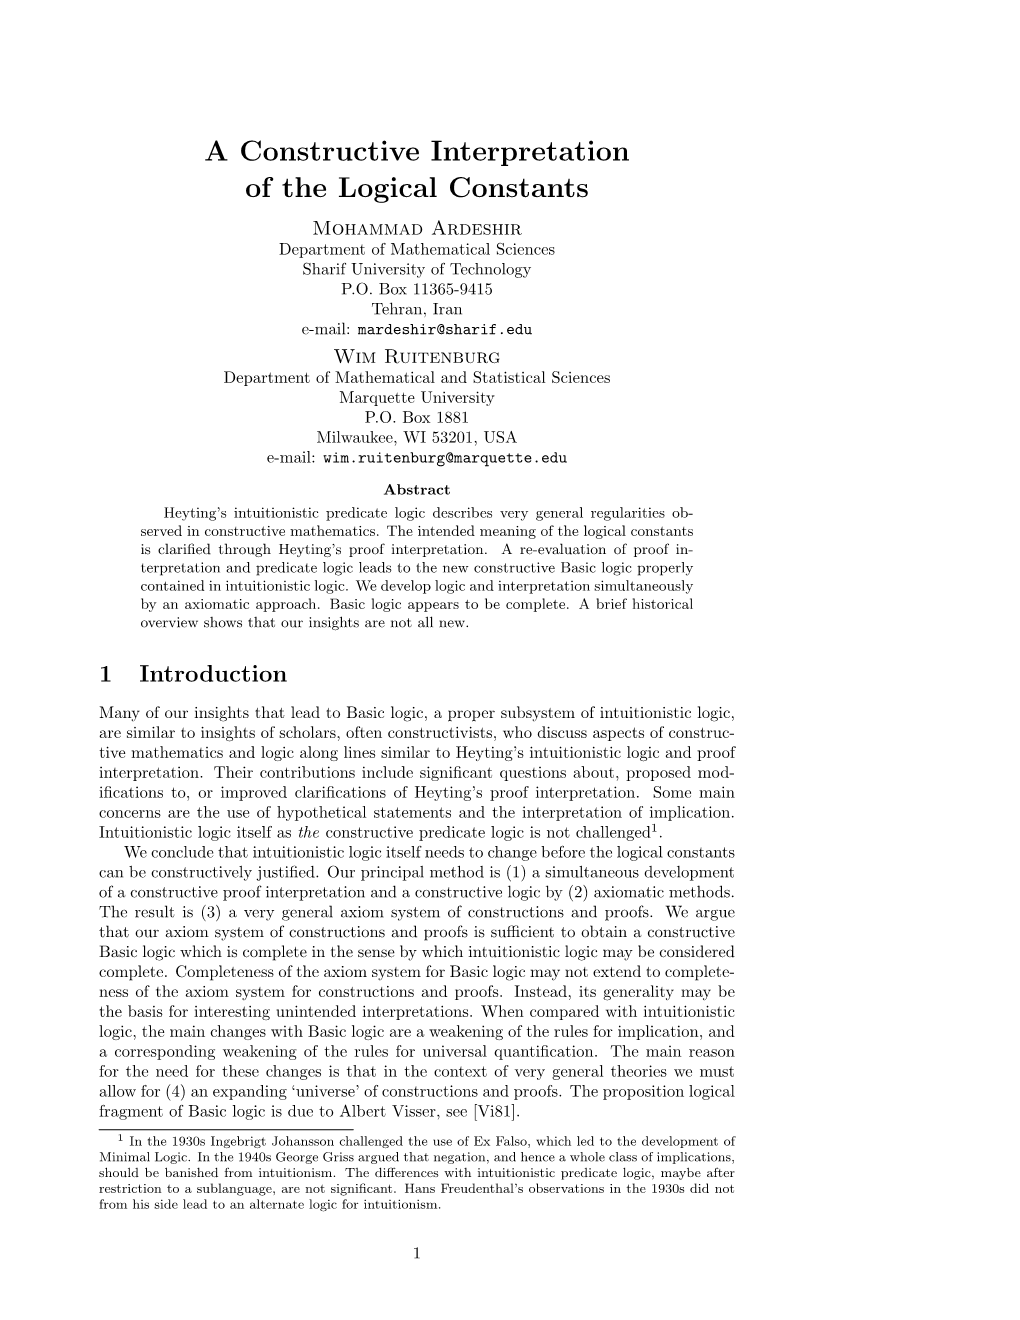 A Constructive Interpretation of the Logical Constants Mohammad Ardeshir Department of Mathematical Sciences Sharif University of Technology P.O